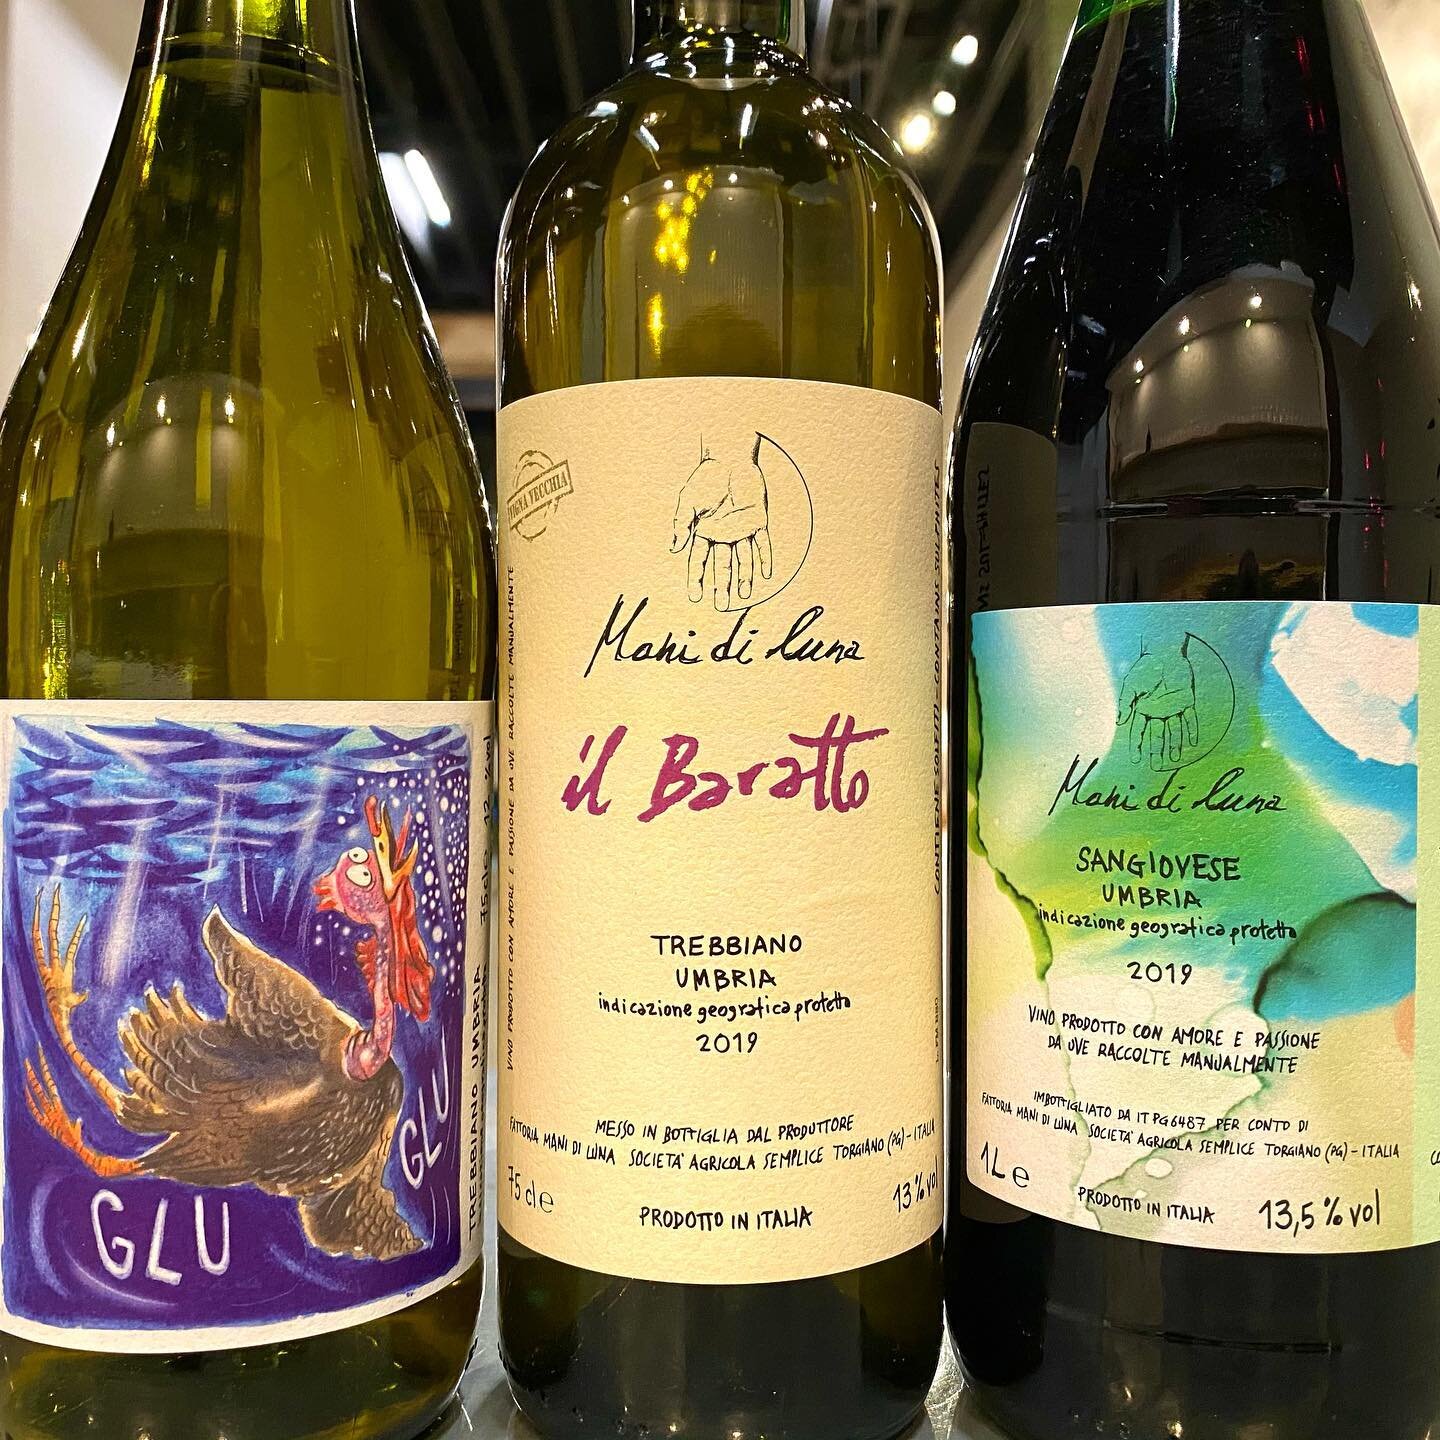 Fattoria Mani di Luna is the labor of love of three long-time friends who took over a farm &amp; vineyards in the hills of Torgiano (Umbria), where viticulture dates back to the Etruscans. They cultivate the vines according to rigorous biodynamic far